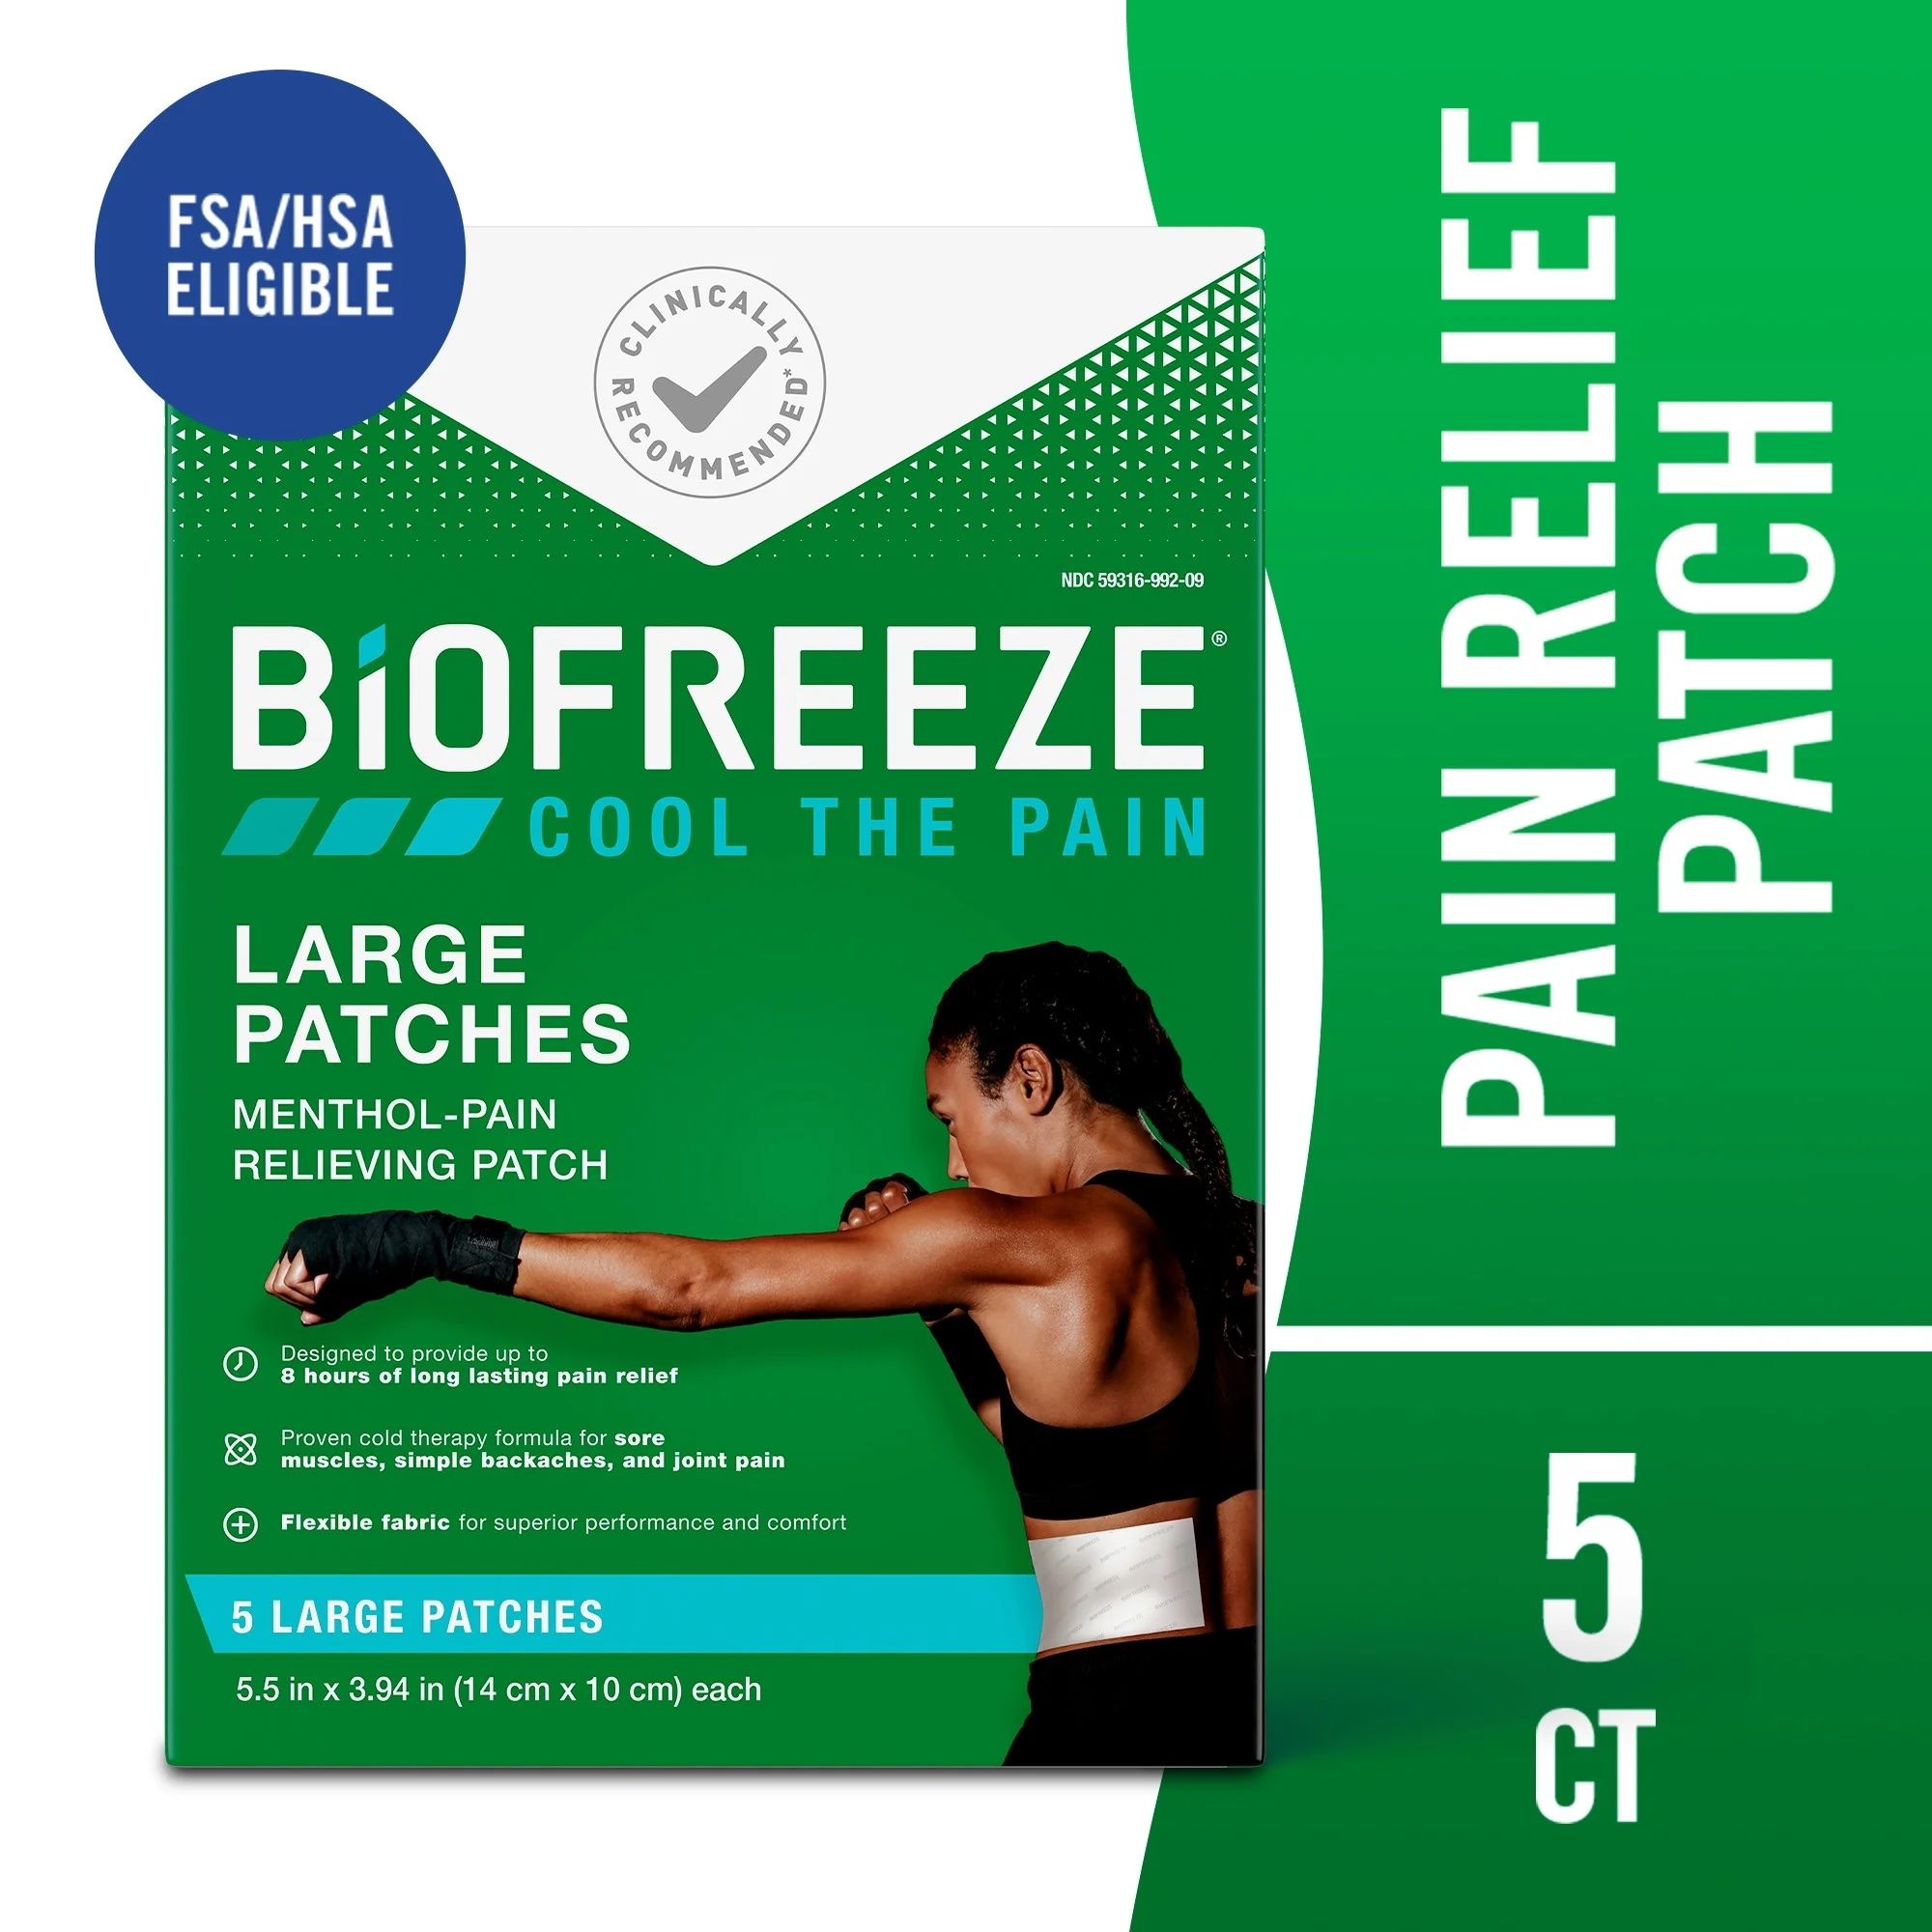 Biofreeze Topical Pain Relief Patches, Large - 5 patches